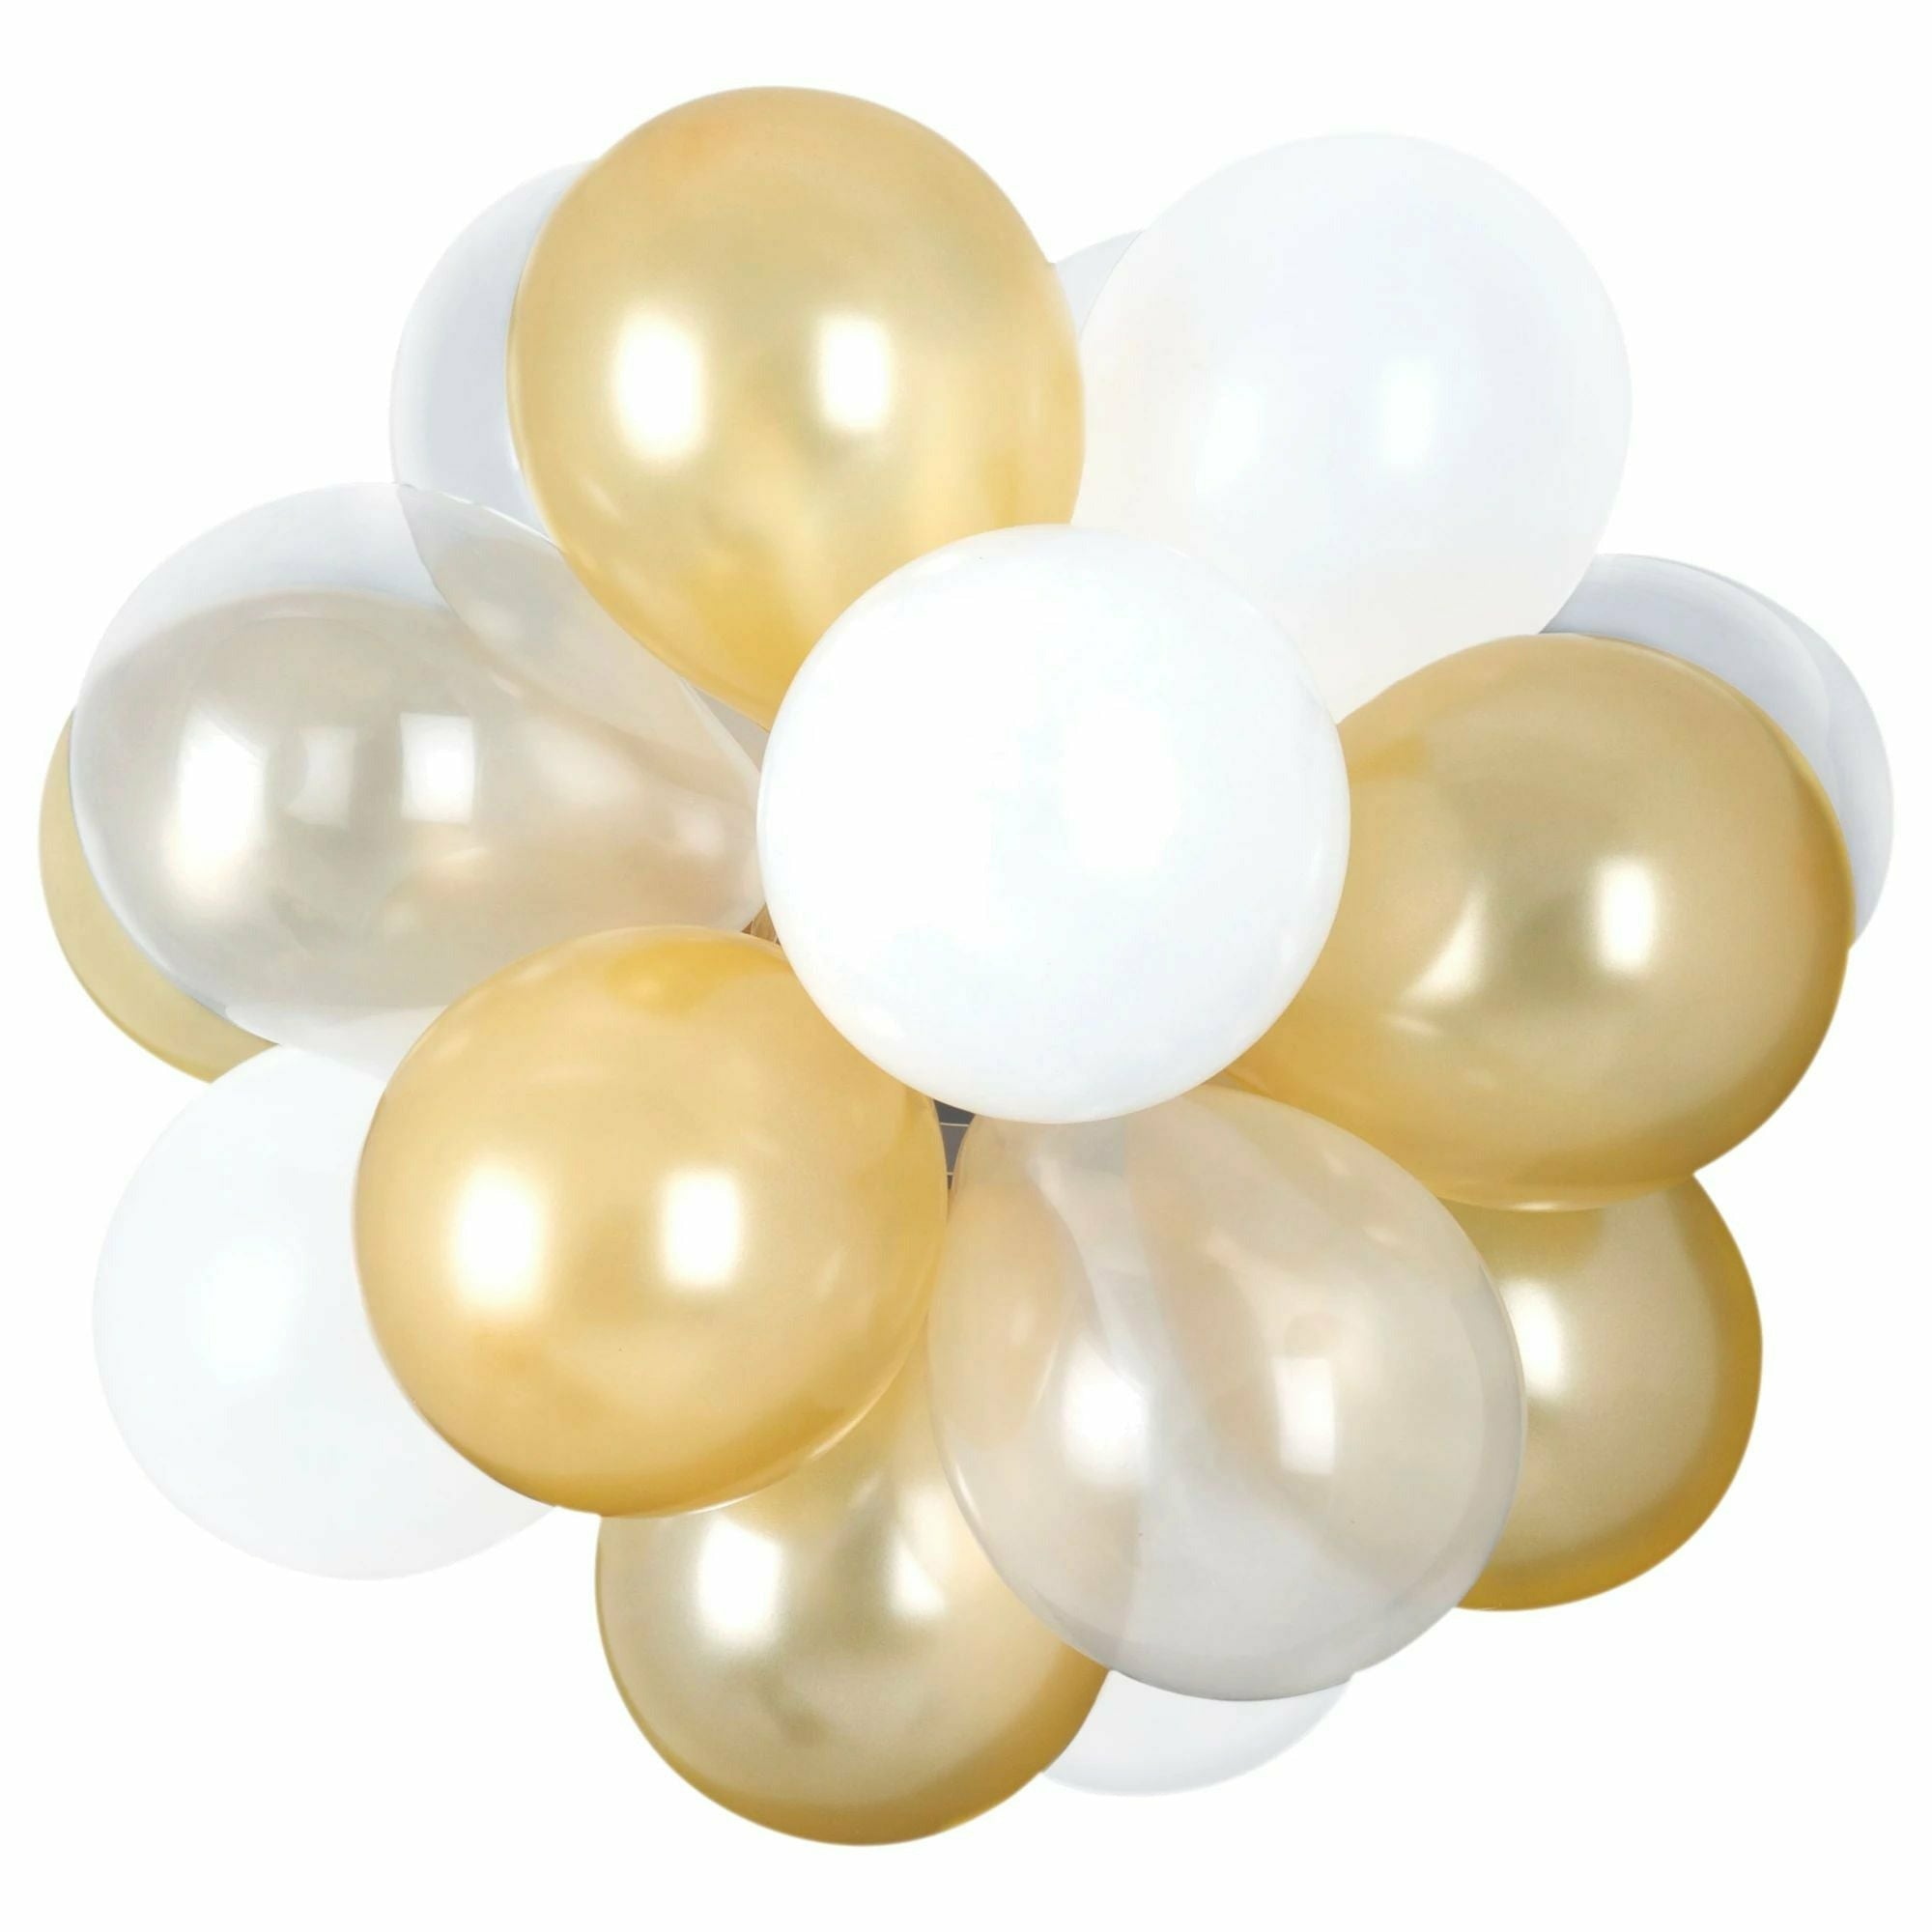 Amscan HOLIDAY: NEW YEAR'S Air-Filled Latex Balloon Chandelier - Golden